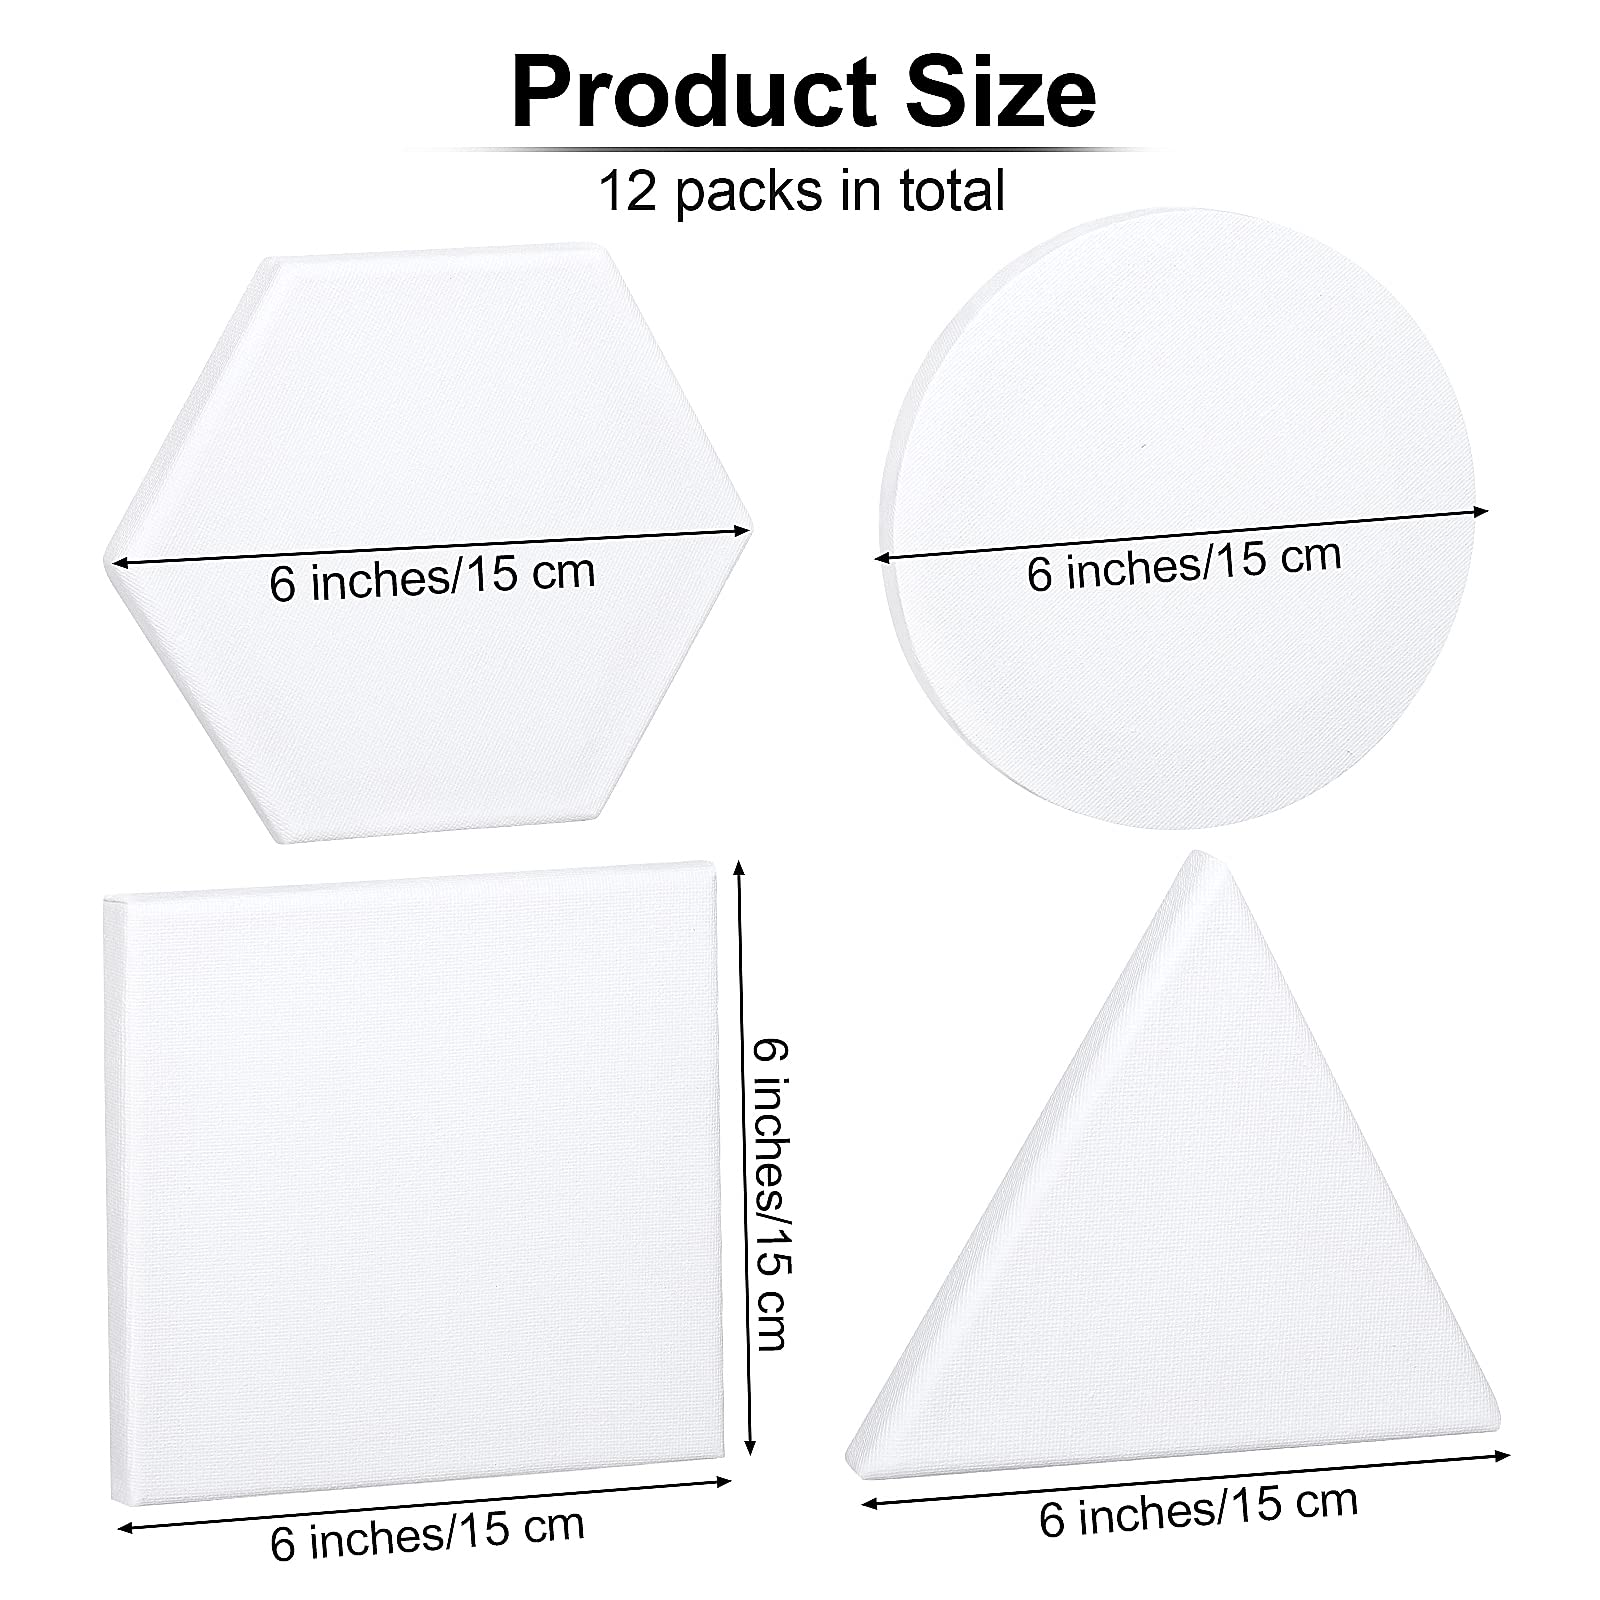 Aodaer 12 Pieces Stretched Canvas Blank Painting Canvas 6 Inch Panel Artist White Canvas Boards Triangle Square Hexagon Round Shape Canvas Frame for Acrylic Pouring Oil Painting